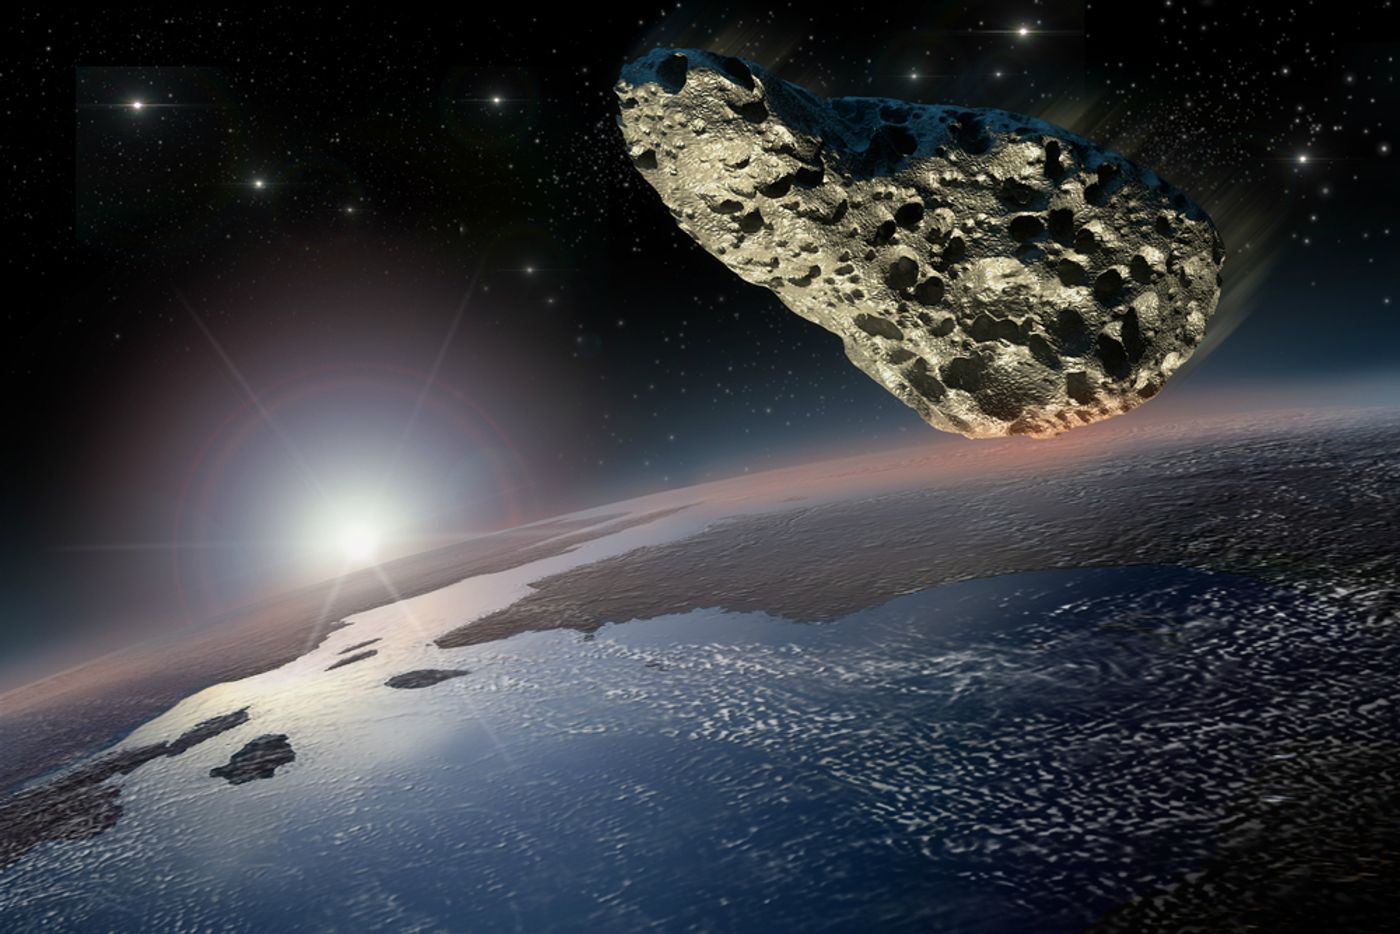 Is the Taurid Meteor Shower Hiding 'Killer' Asteroids? | Space